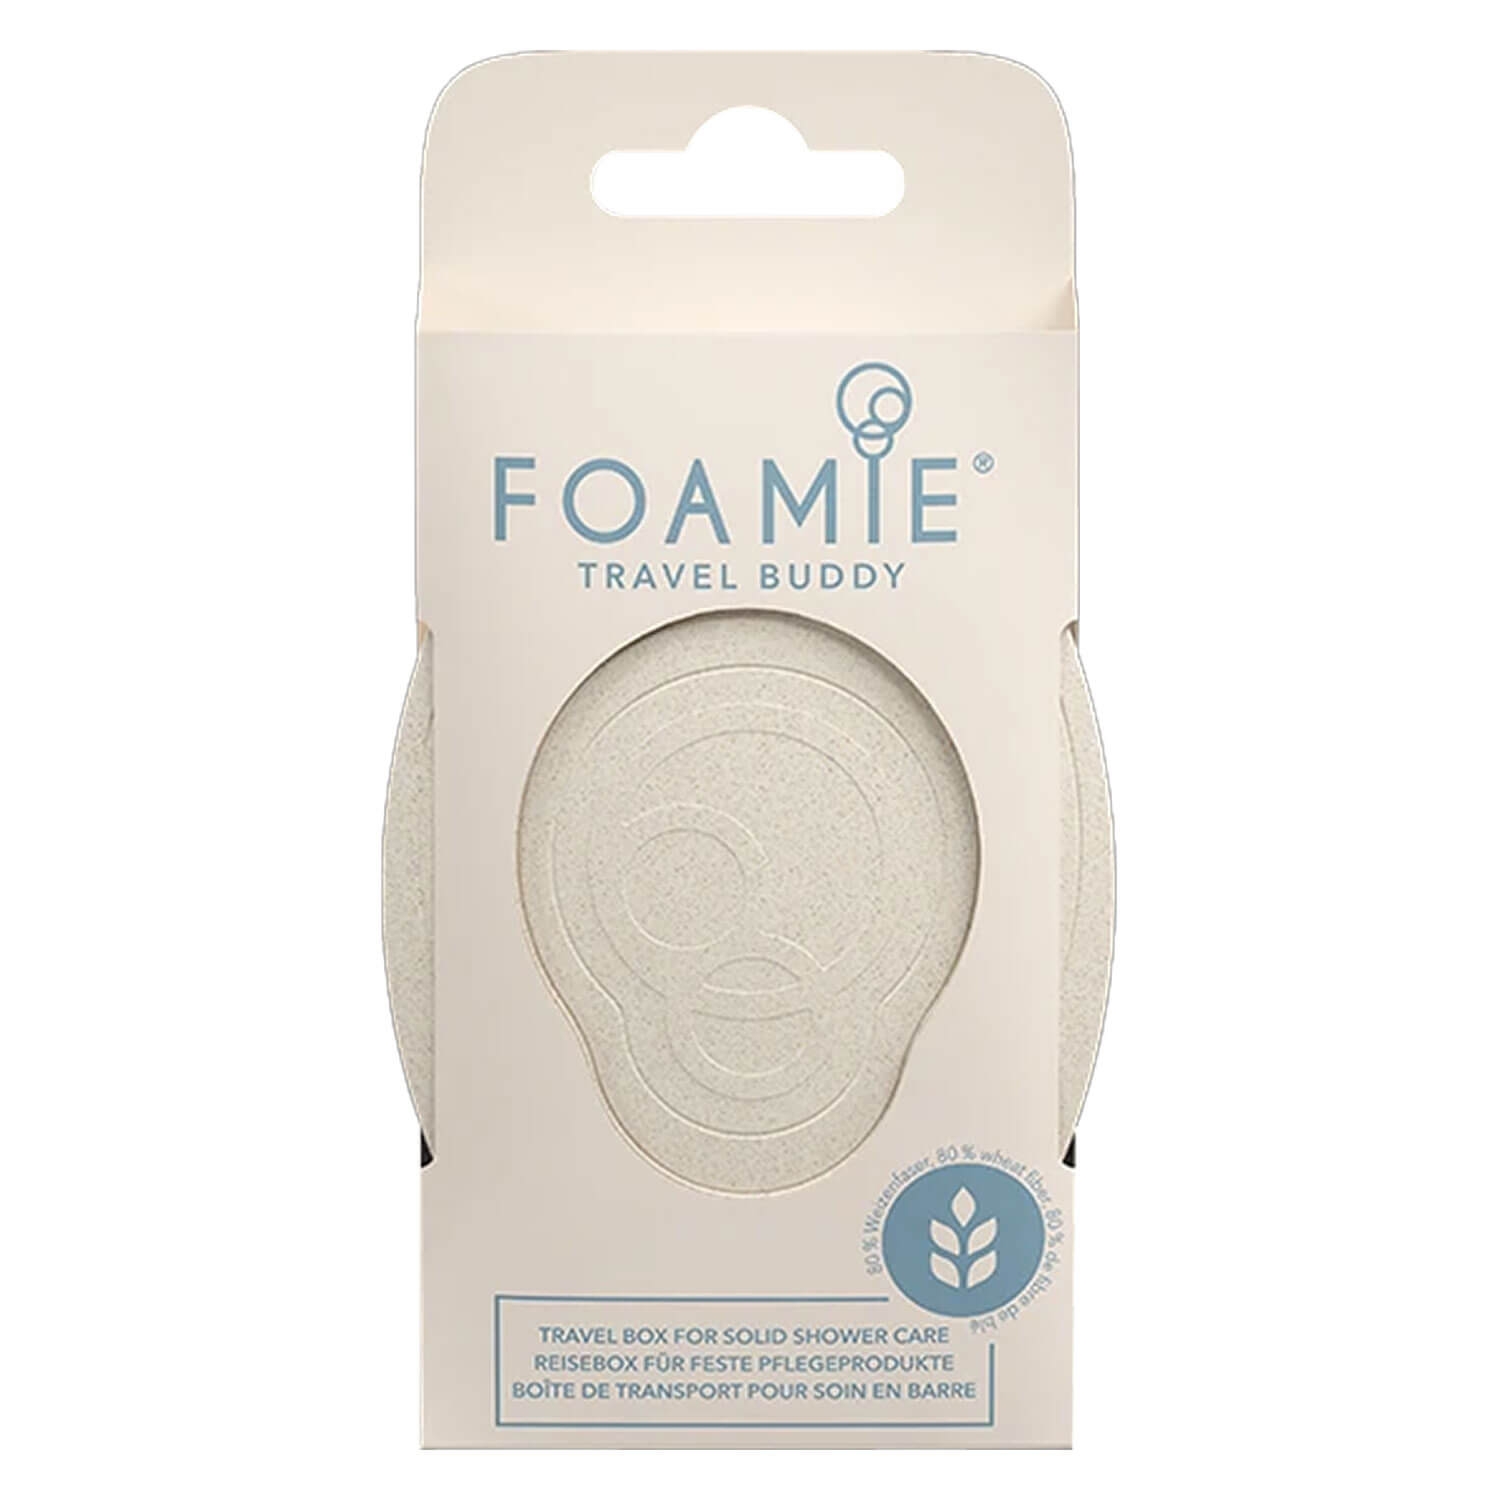 Product image from Foamie - Travel Buddy